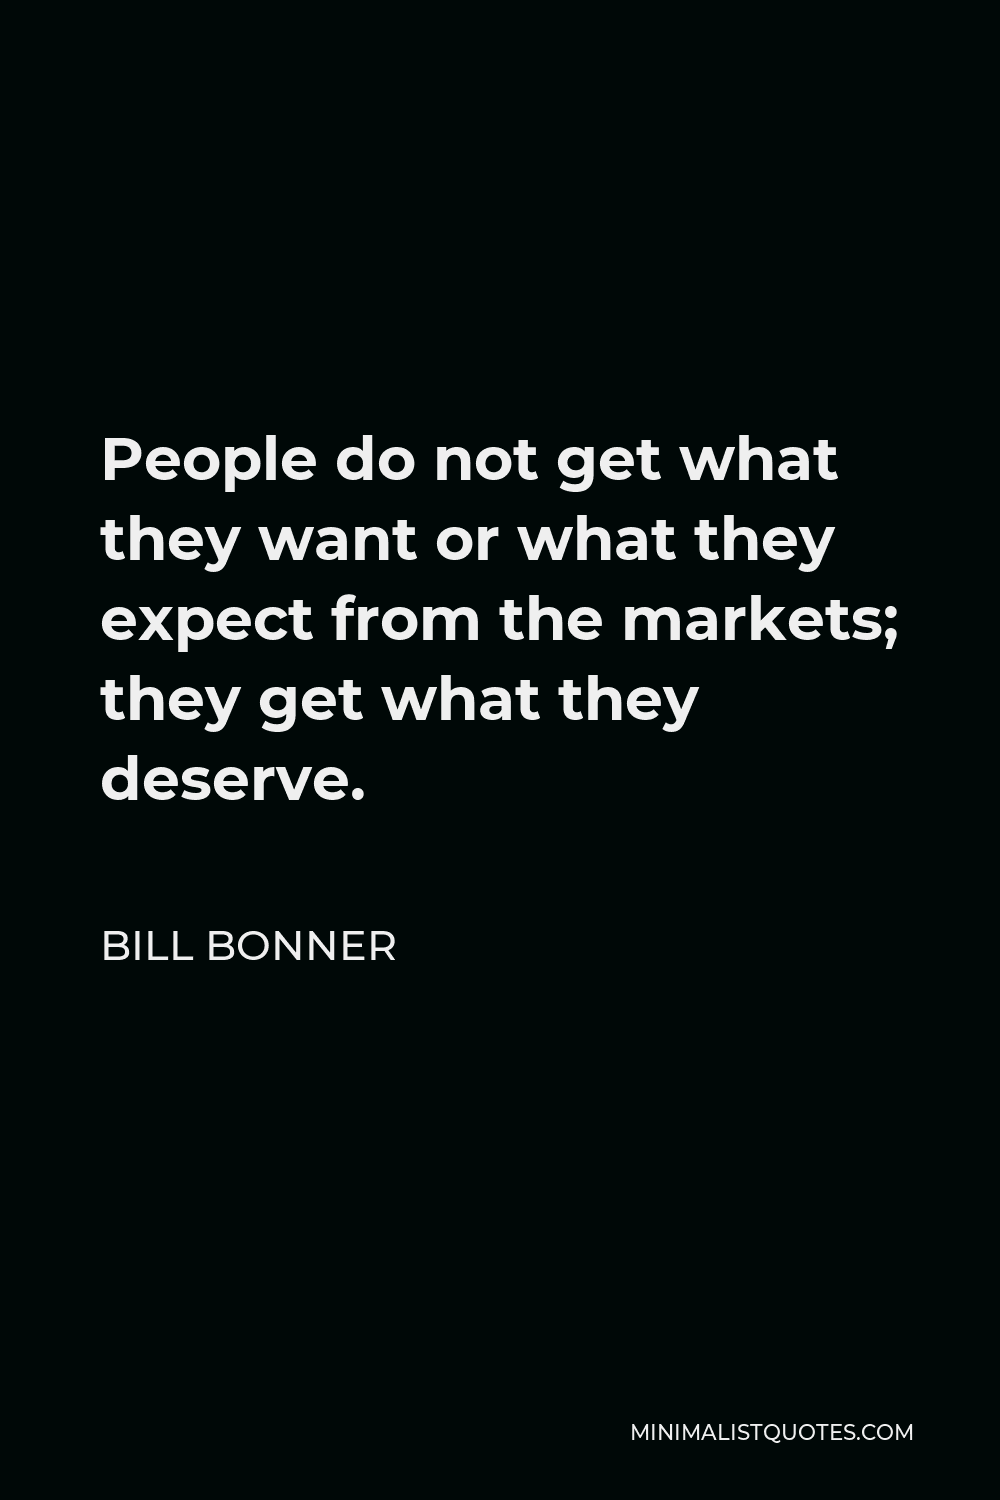 Bill Bonner Quote - People do not get what they want or what they expect from the markets; they get what they deserve.